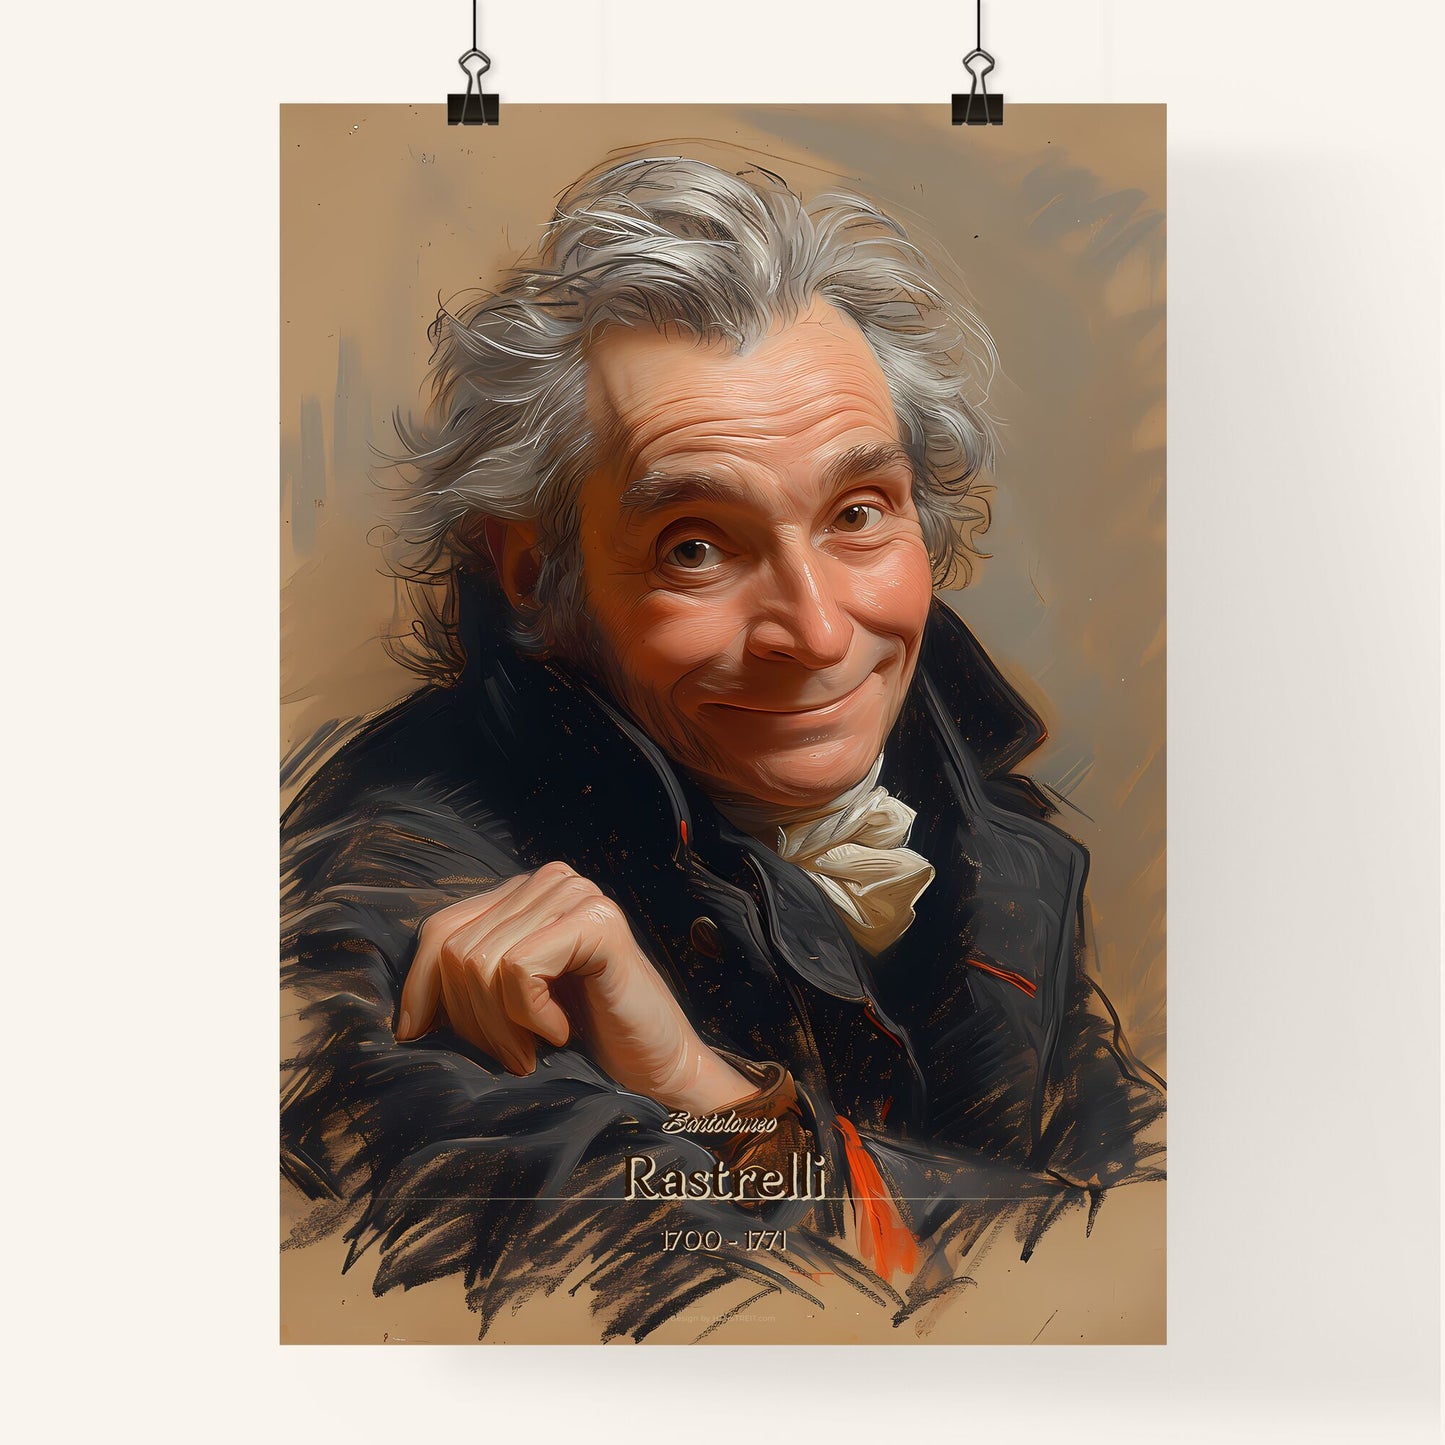 Bartolomeo, Rastrelli, 1700 - 1771, A Poster of a man with grey hair and a black coat Default Title